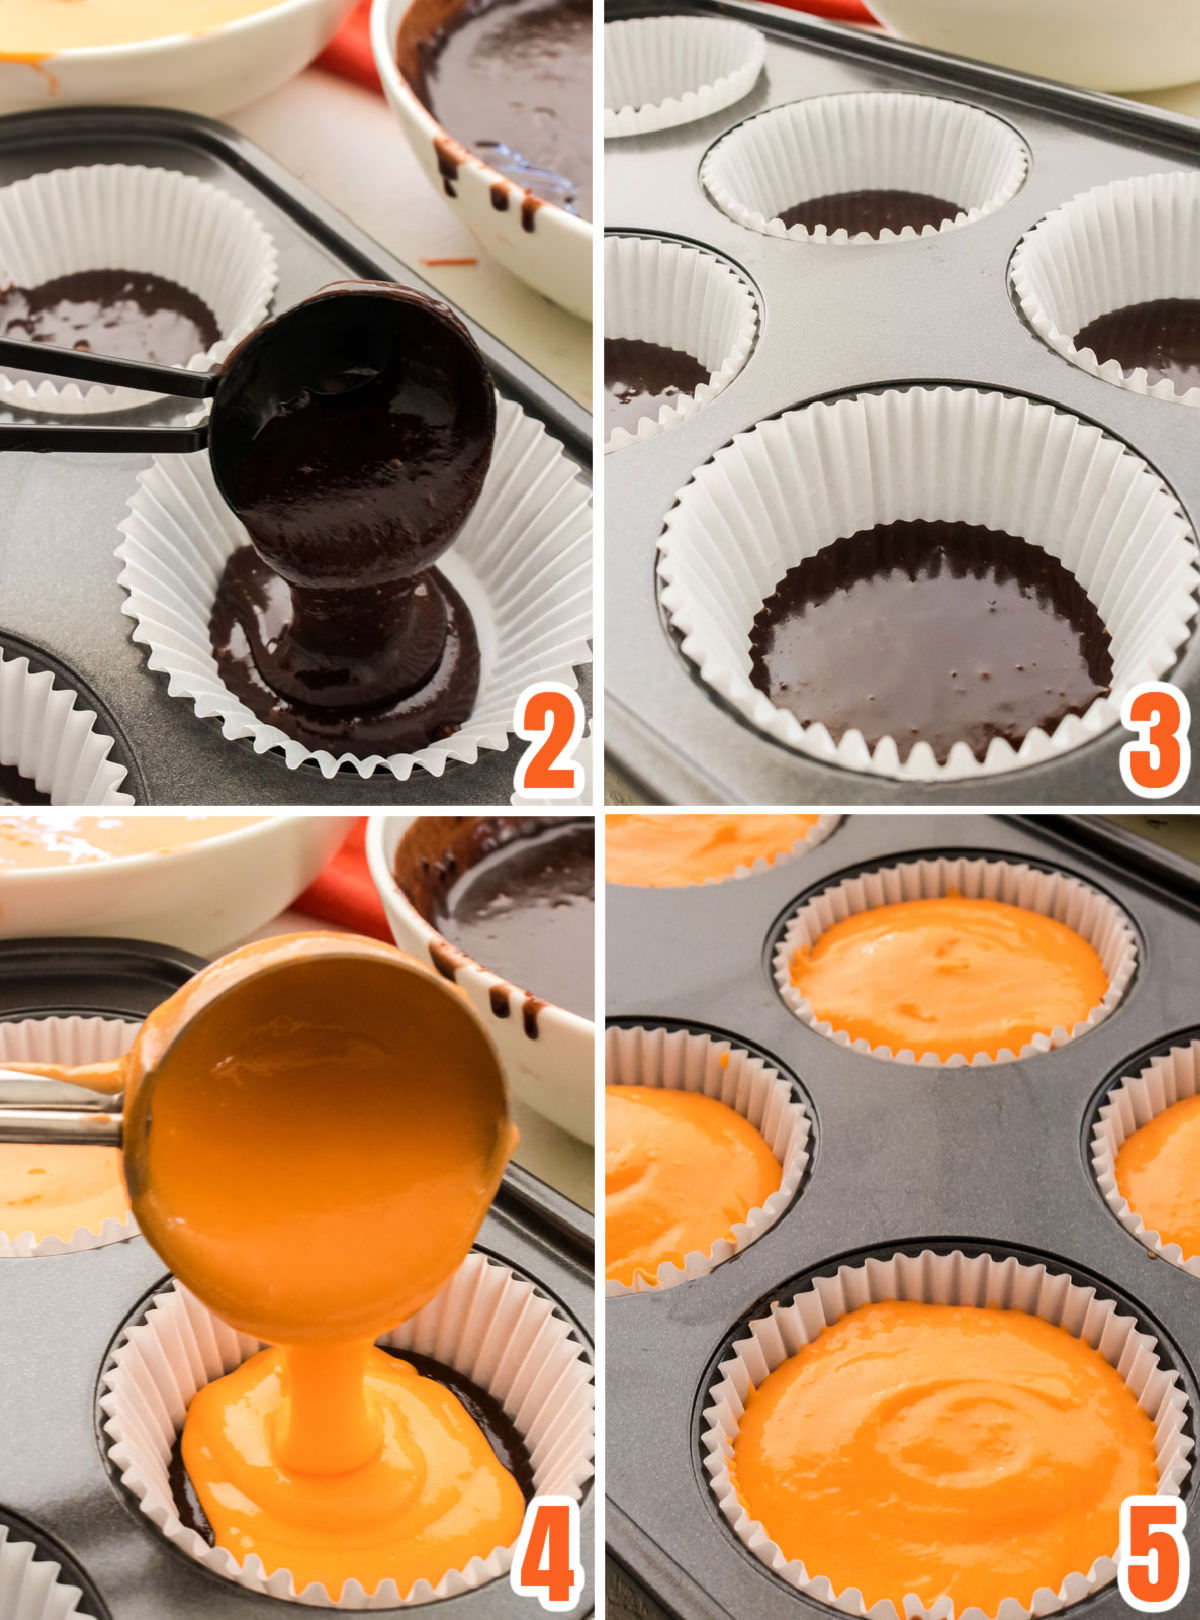 Collage image showing how to fill the cupcake liners with both the brownie and the cake batter.